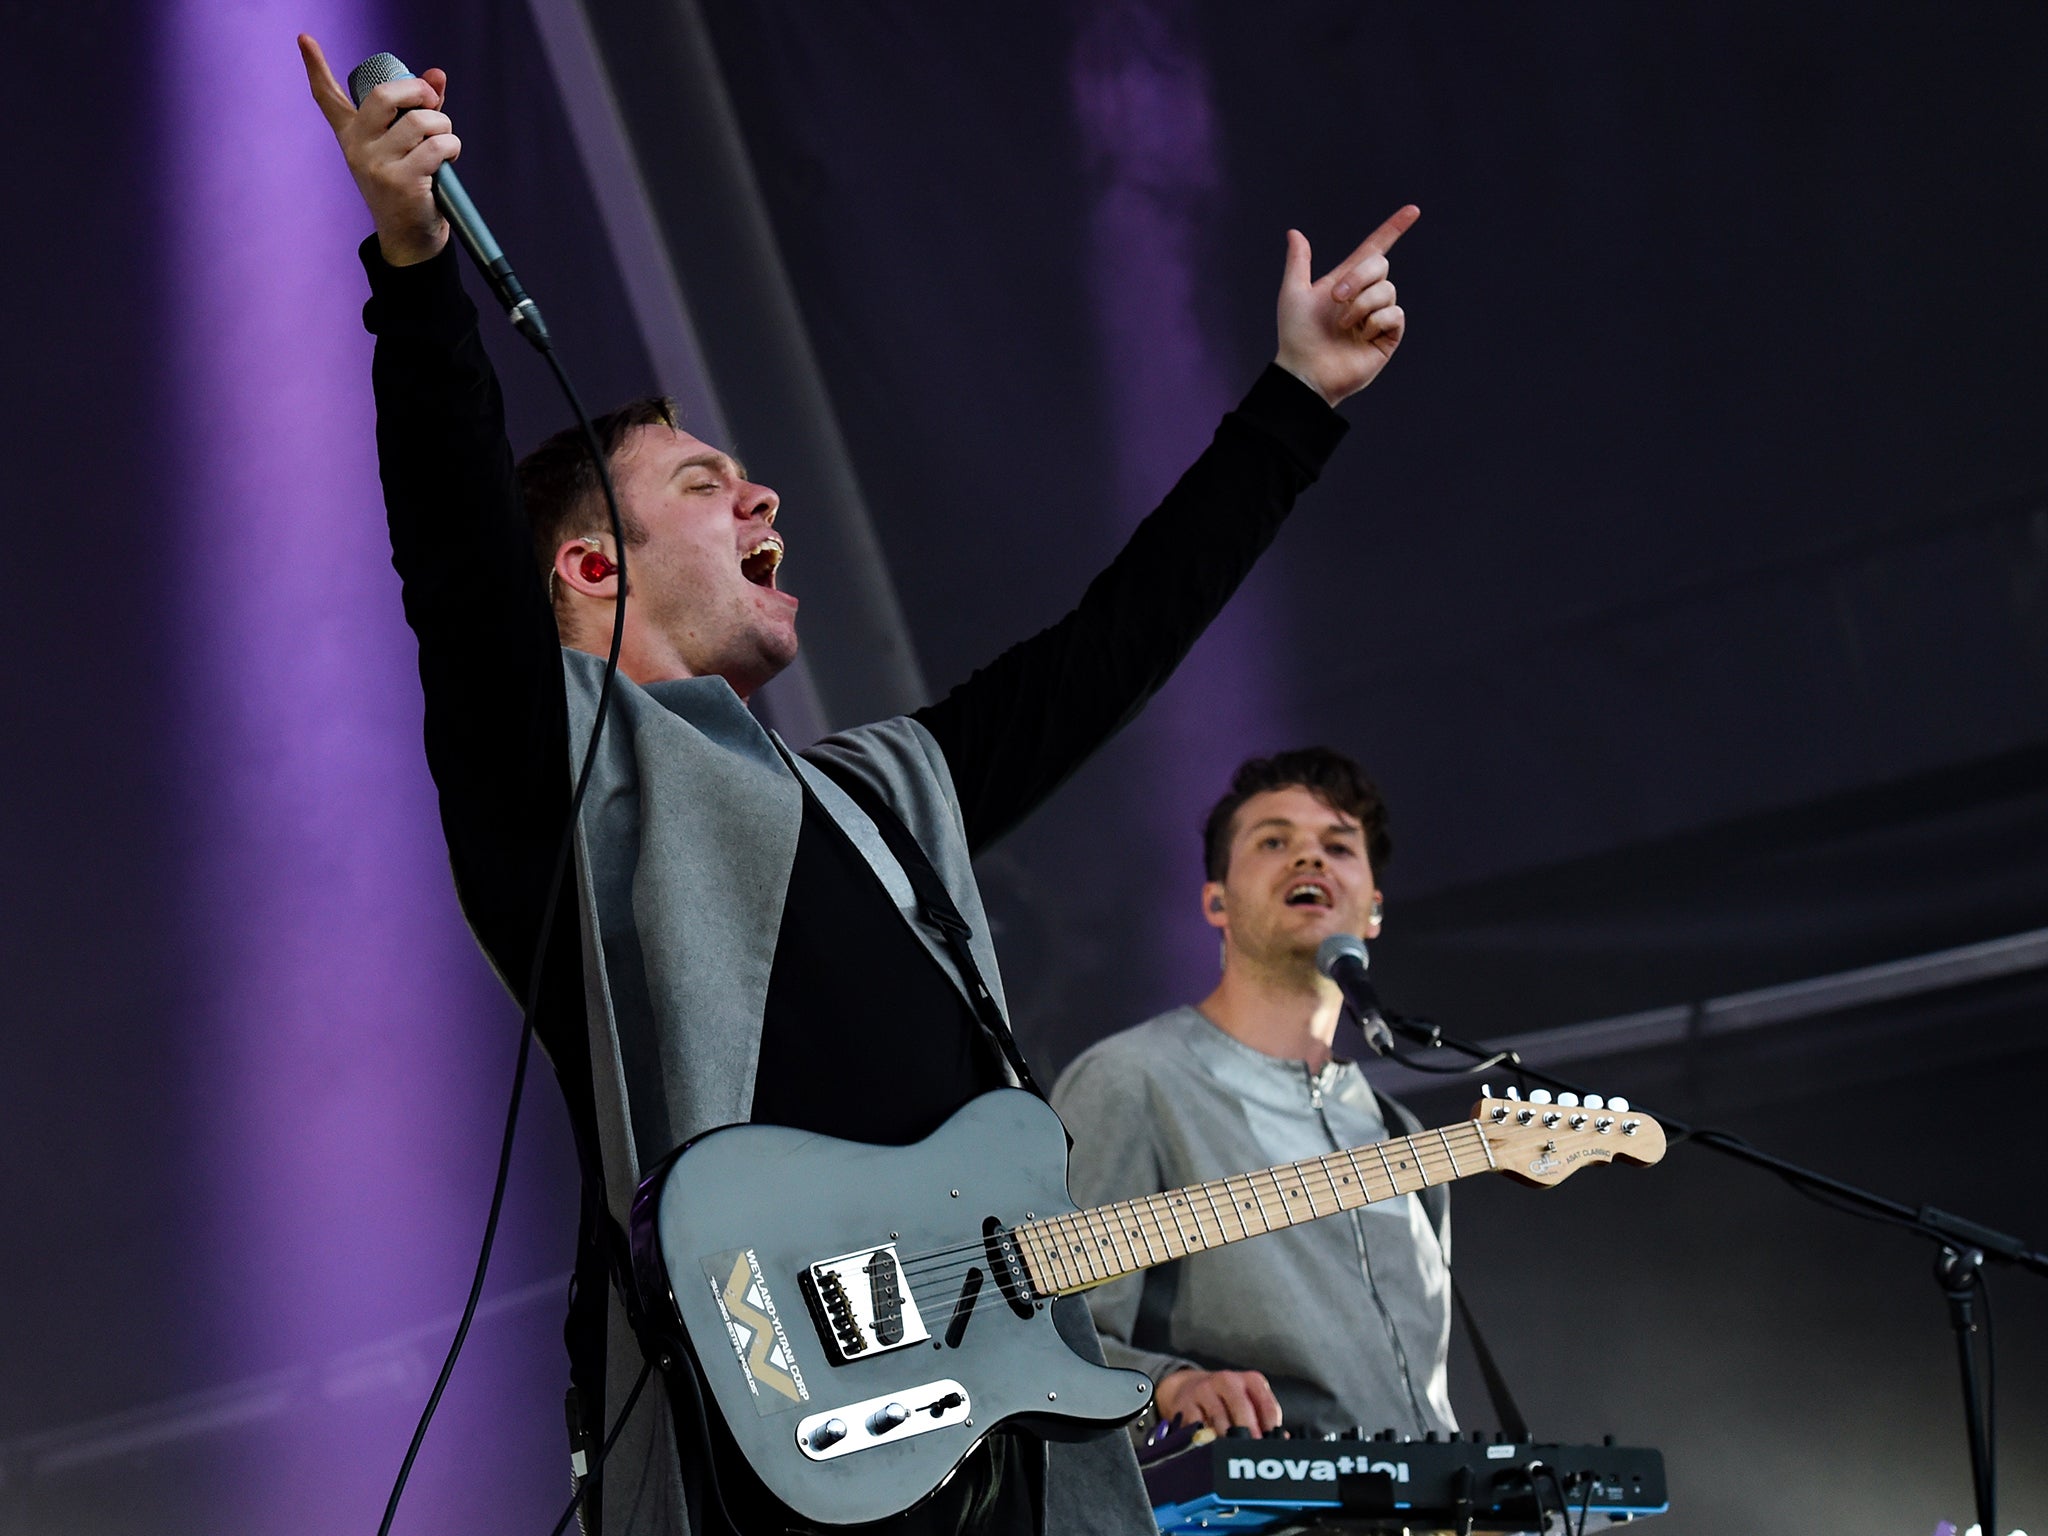 Jonathan Higgs (left) and Jeremy Pritchard from Everything Everything perform at Somerset House’s Summer Series